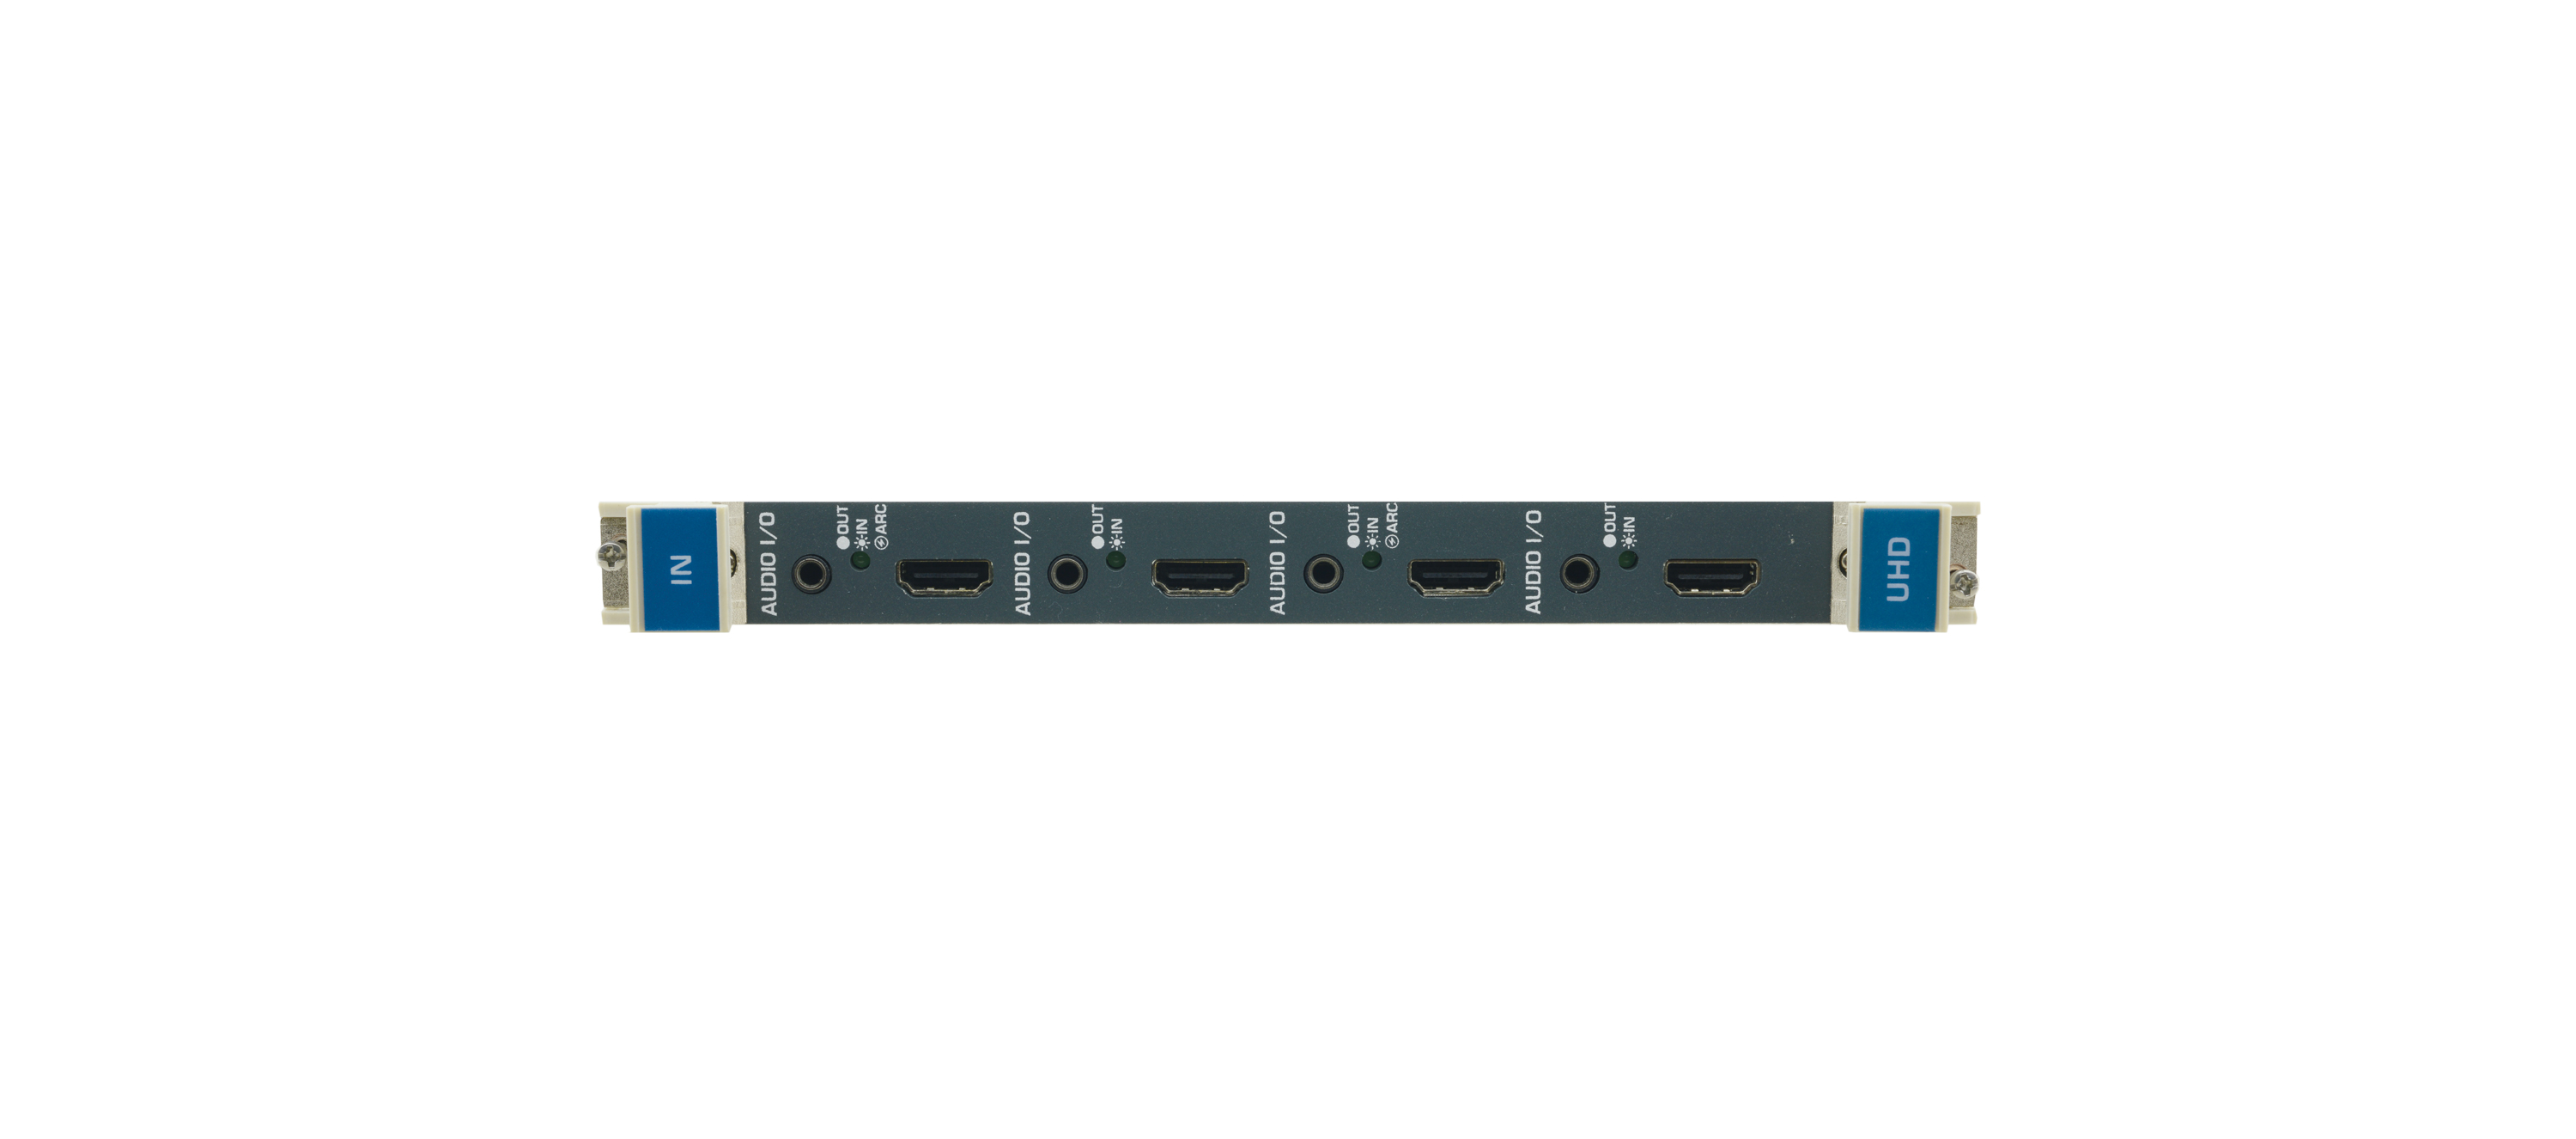 UHDA-IN4-F32/STANDALONE 4–Channel 4K60 4:2:0 HDMI Input Card with Selectable Embedded, De–embedded or ARC Analog Audio